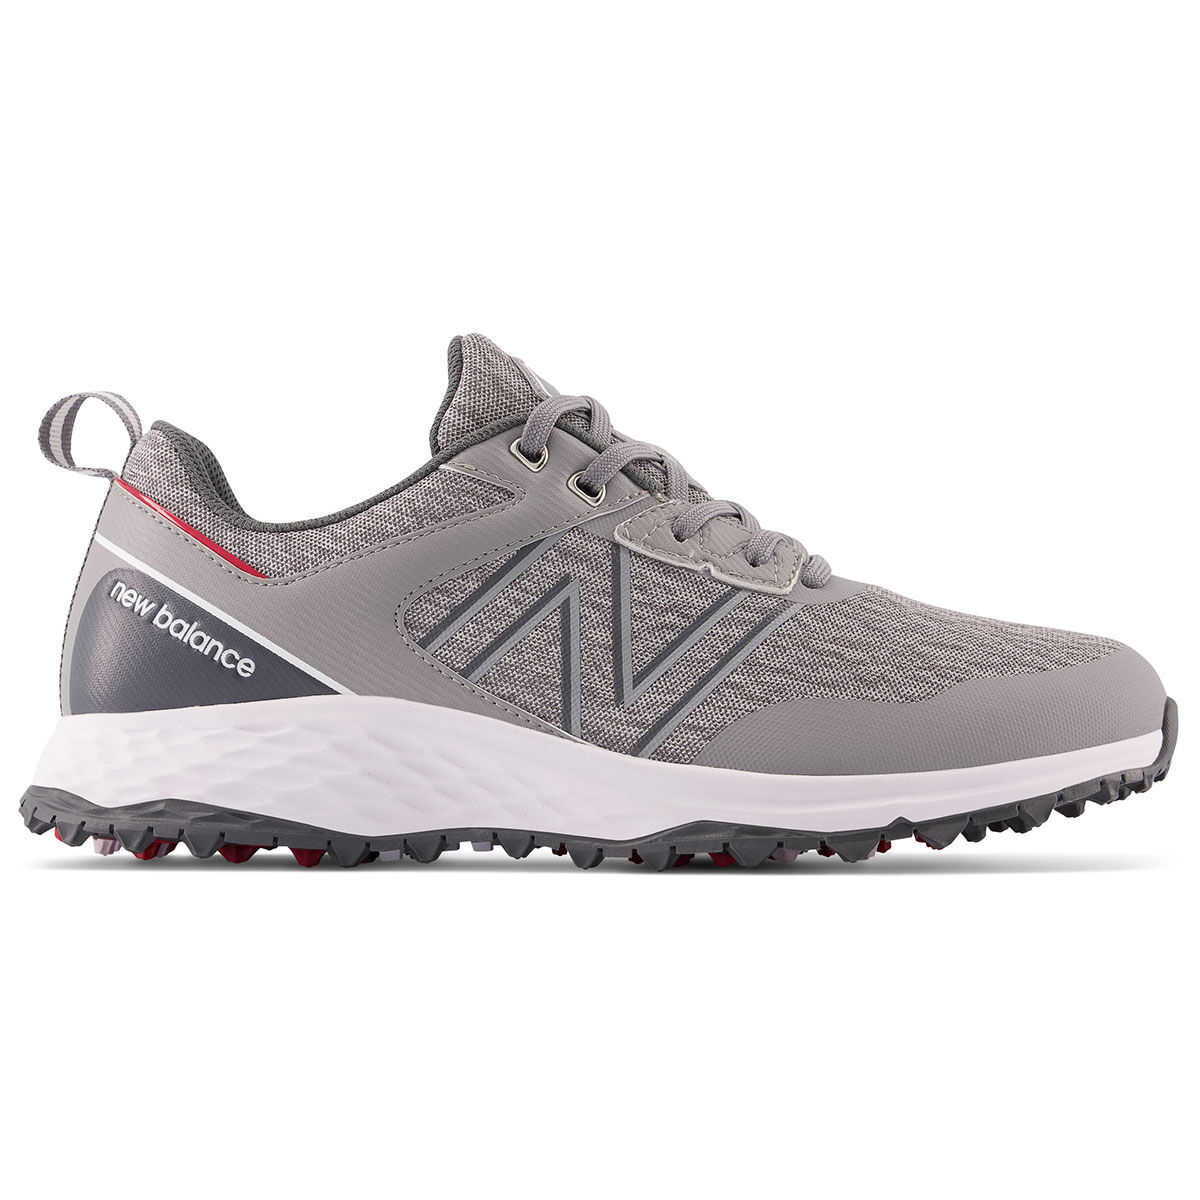 New Balance Men’s Grey and Charcoal Fresh Foam Contend Waterproof Spikeless Golf Shoes, Size: 7.5 | American Golf